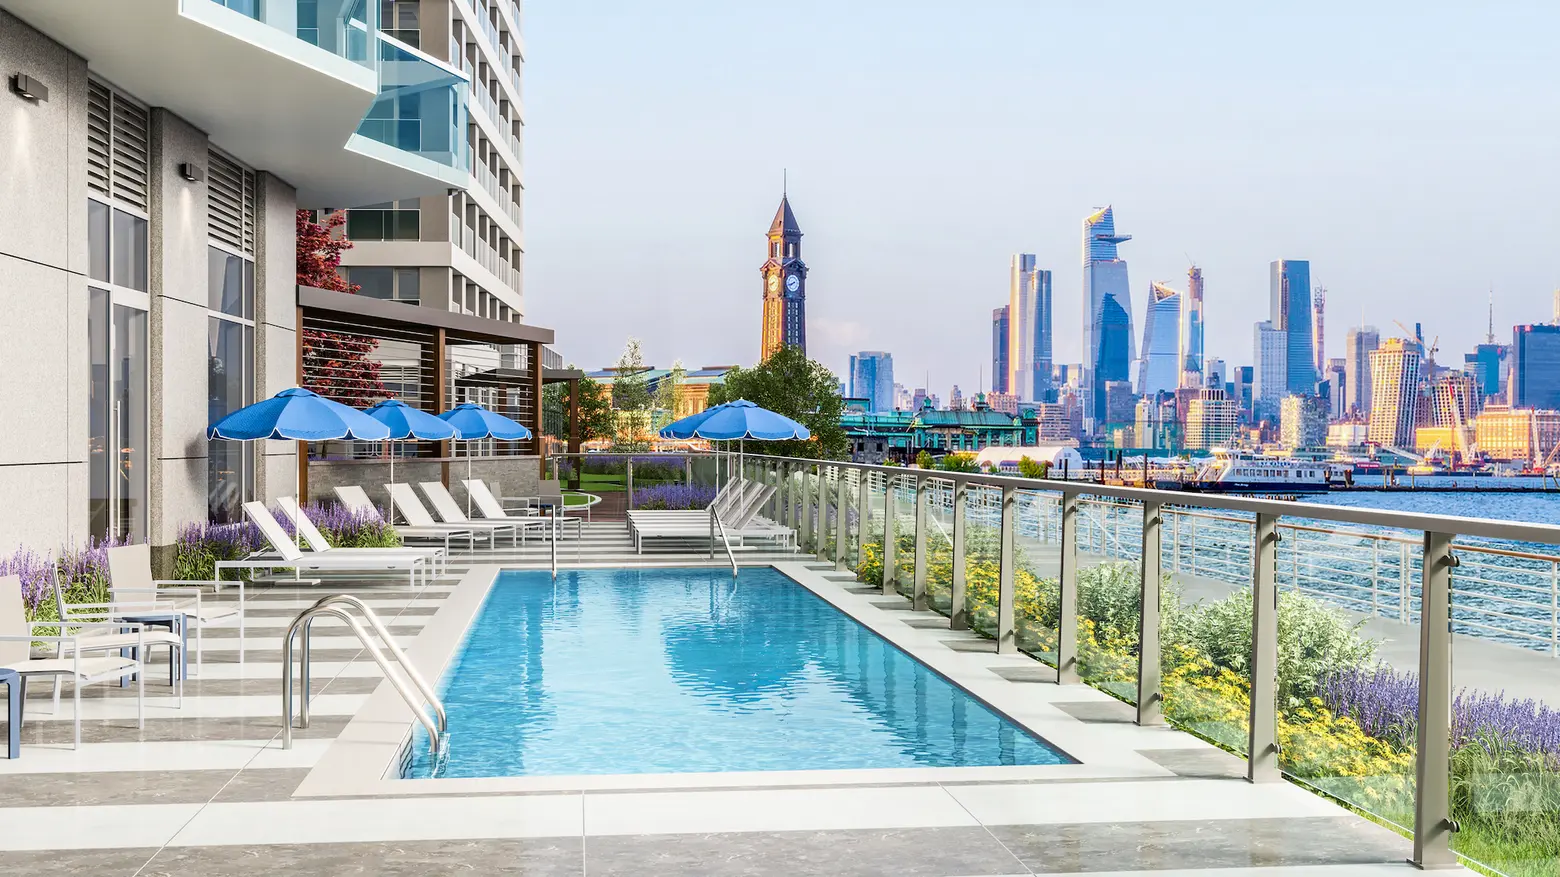 Luxury Jersey City rental The Beach has tons of outdoor space overlooking the skyline